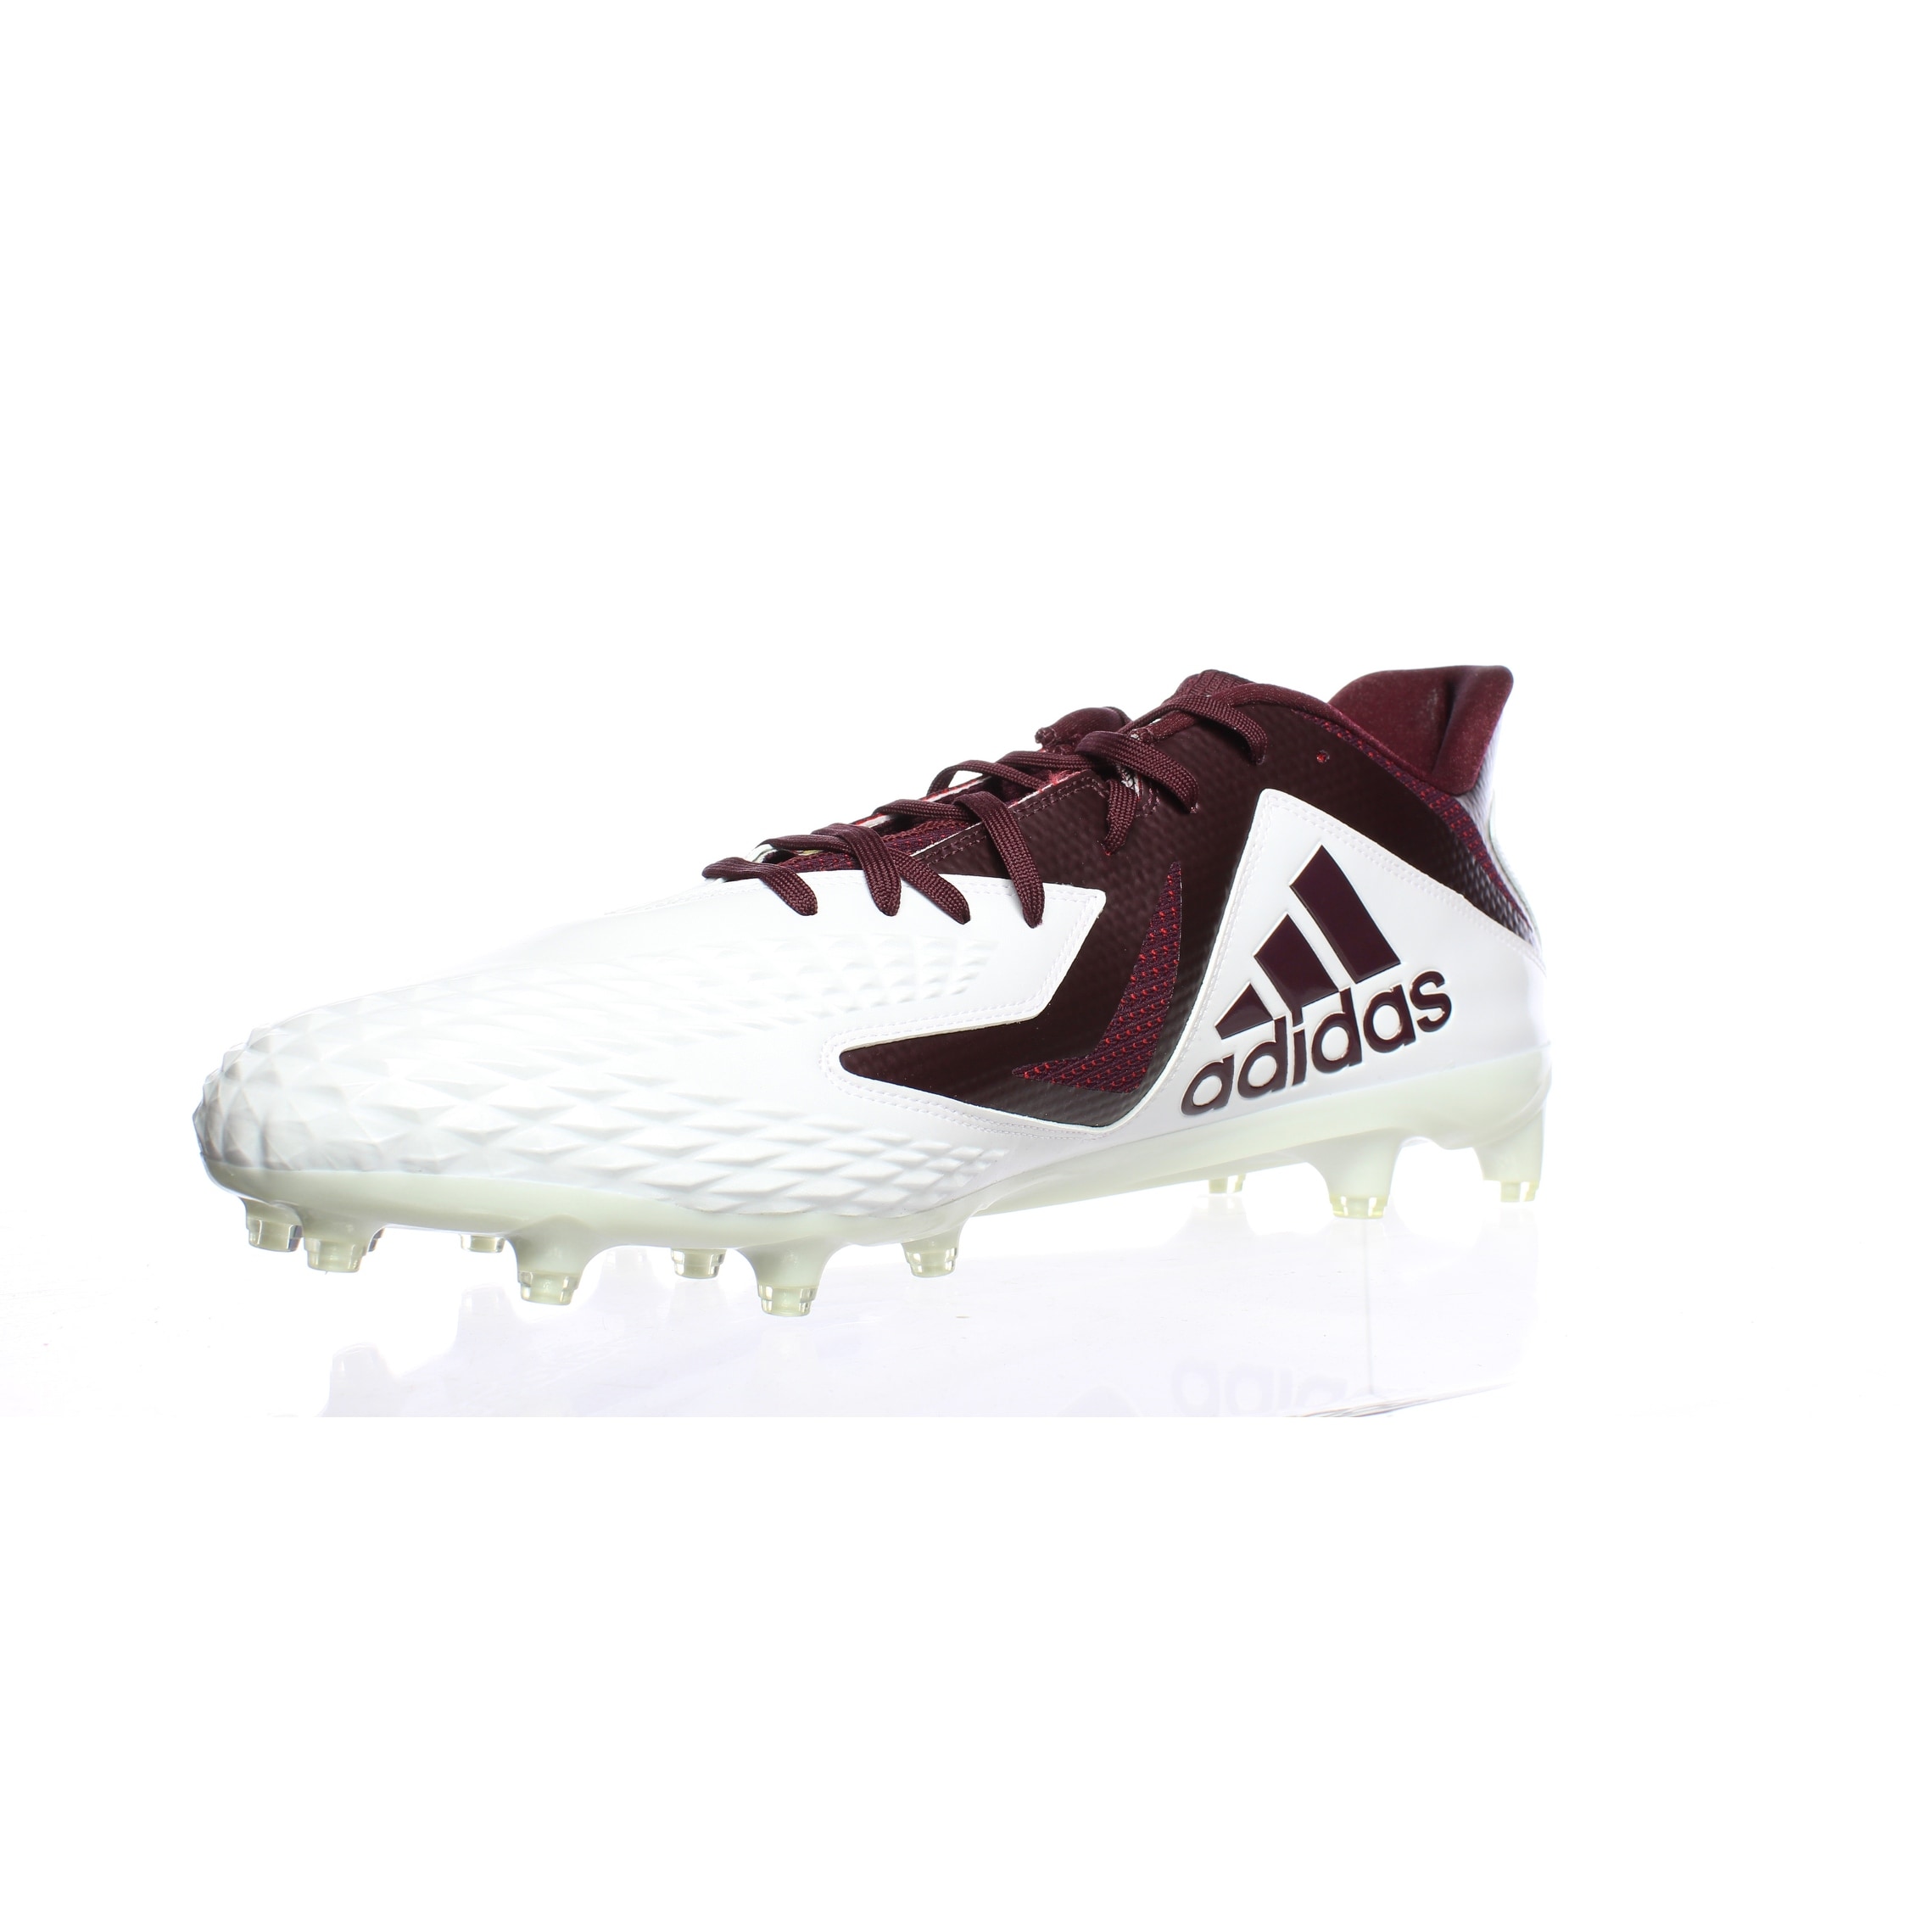 size 18 football cleats